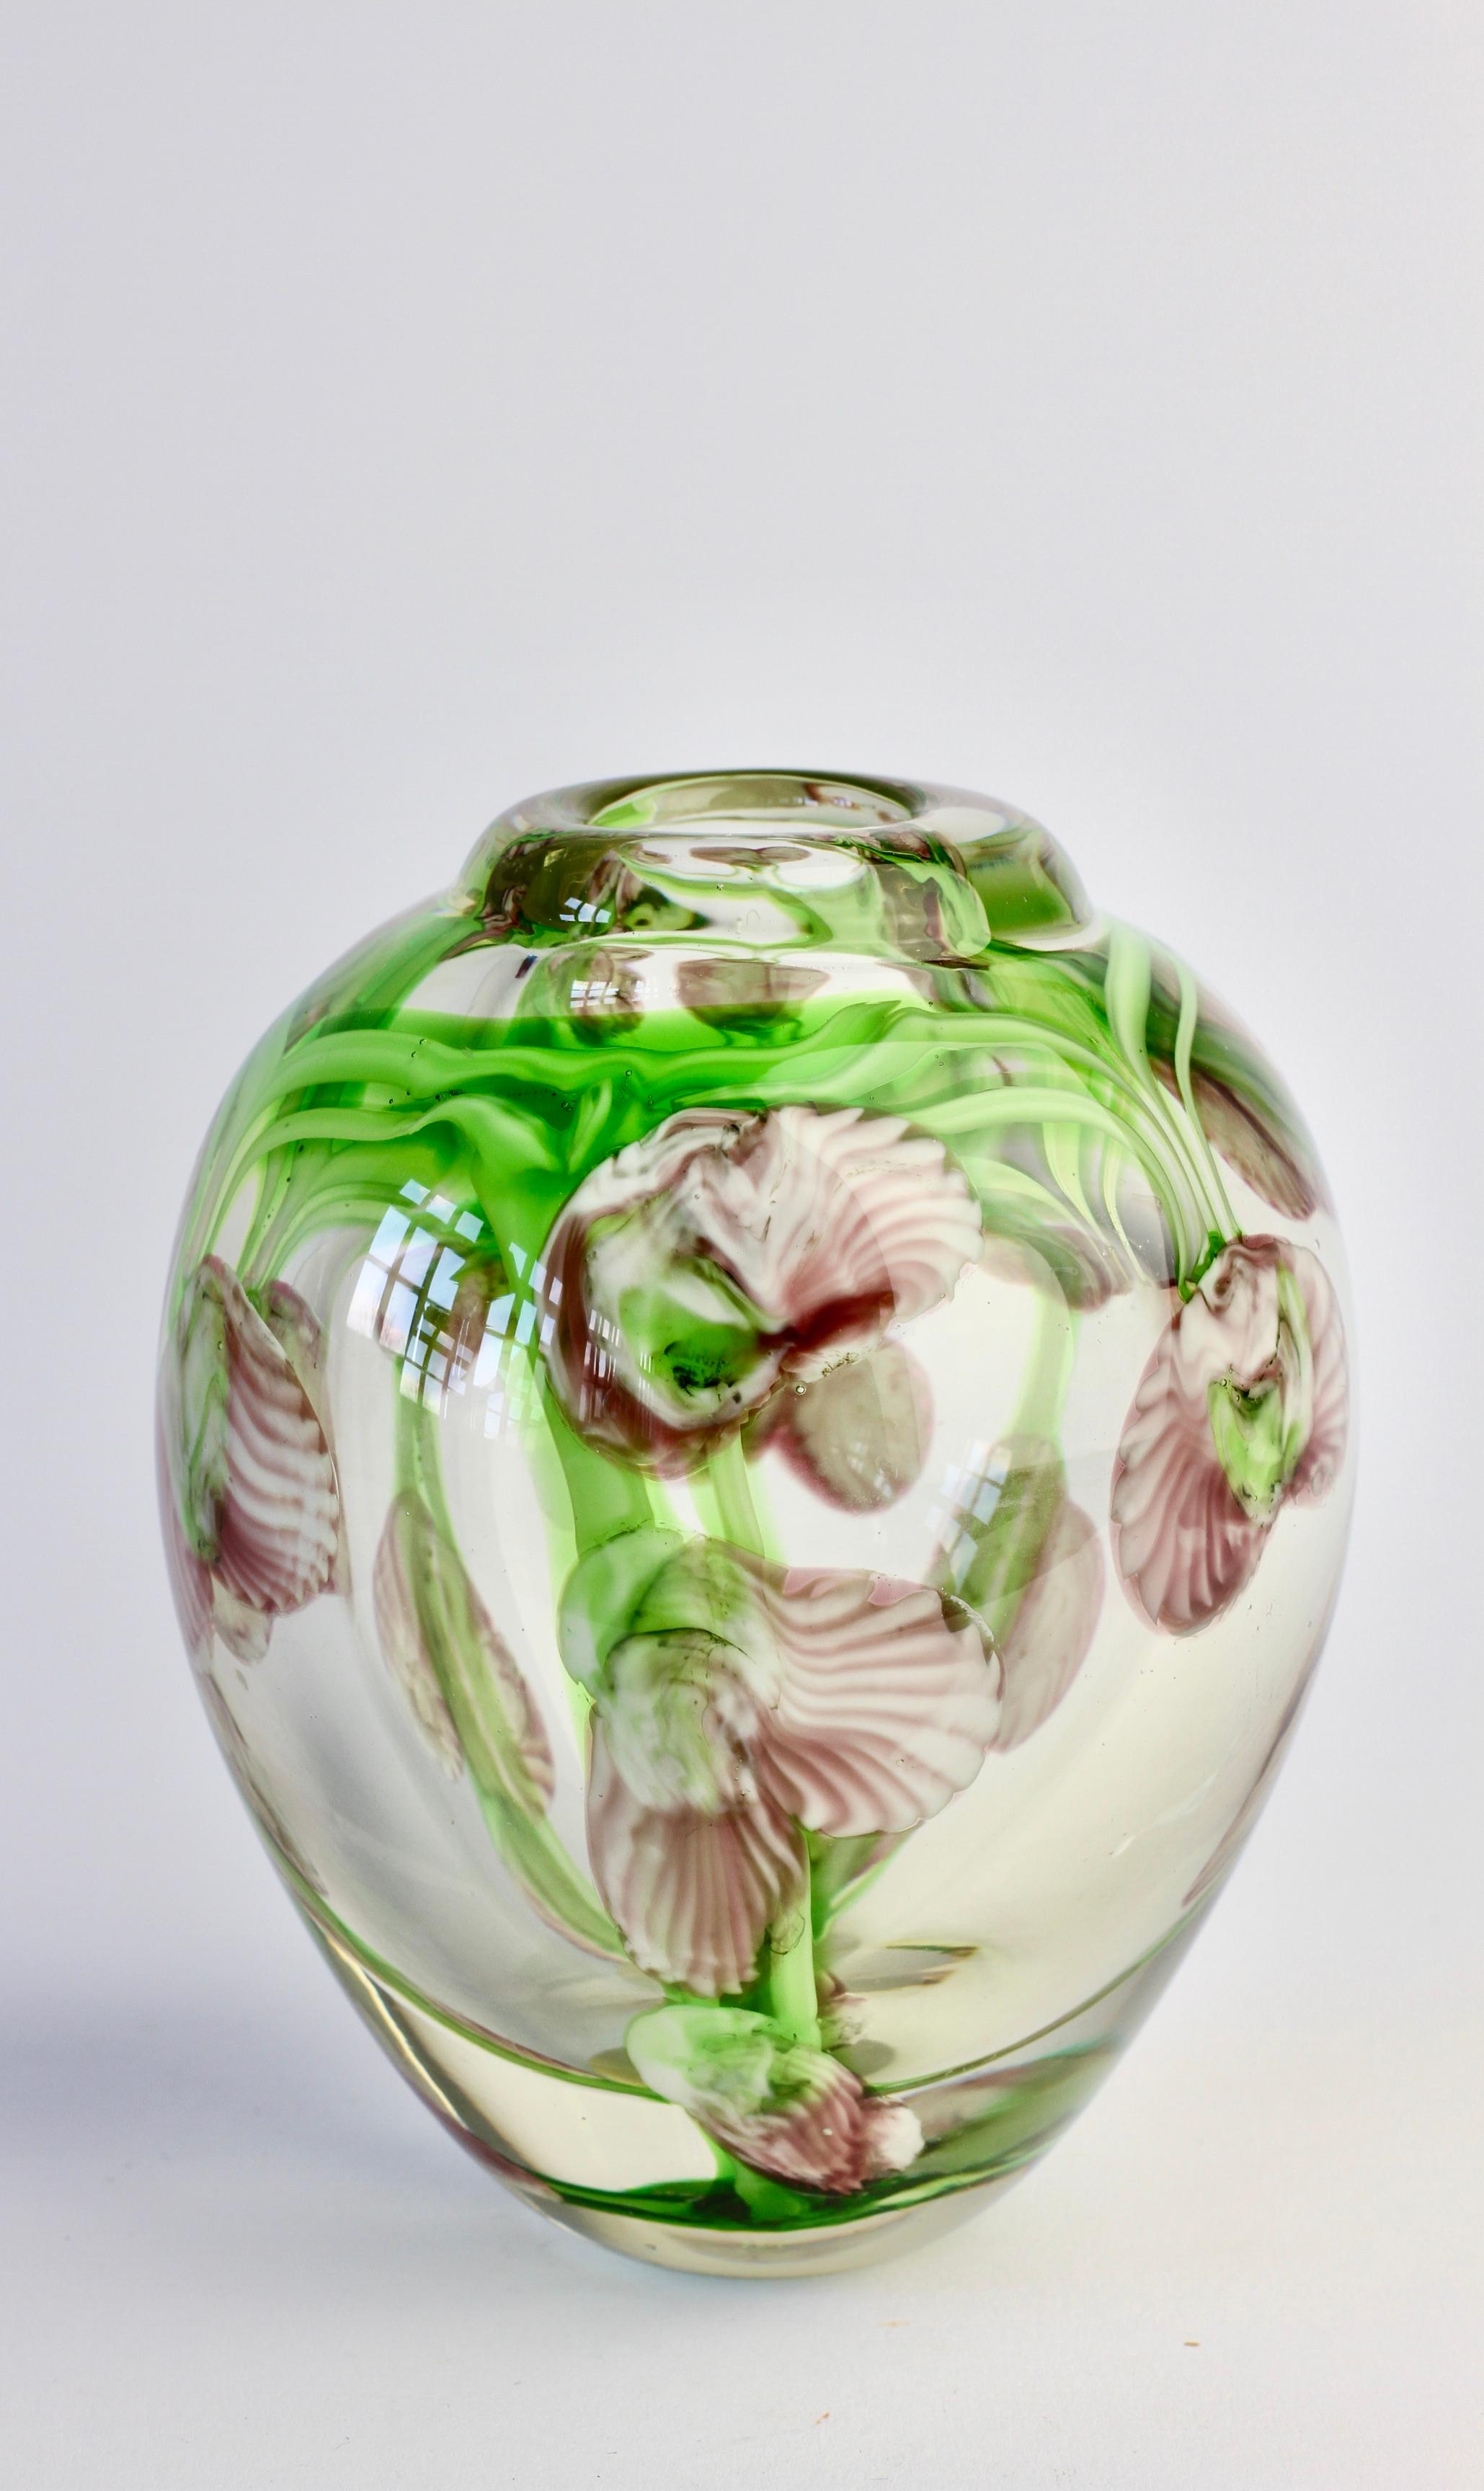 Chinese Decorative Small Glass Vase with Pink and Green Flower Inclusions